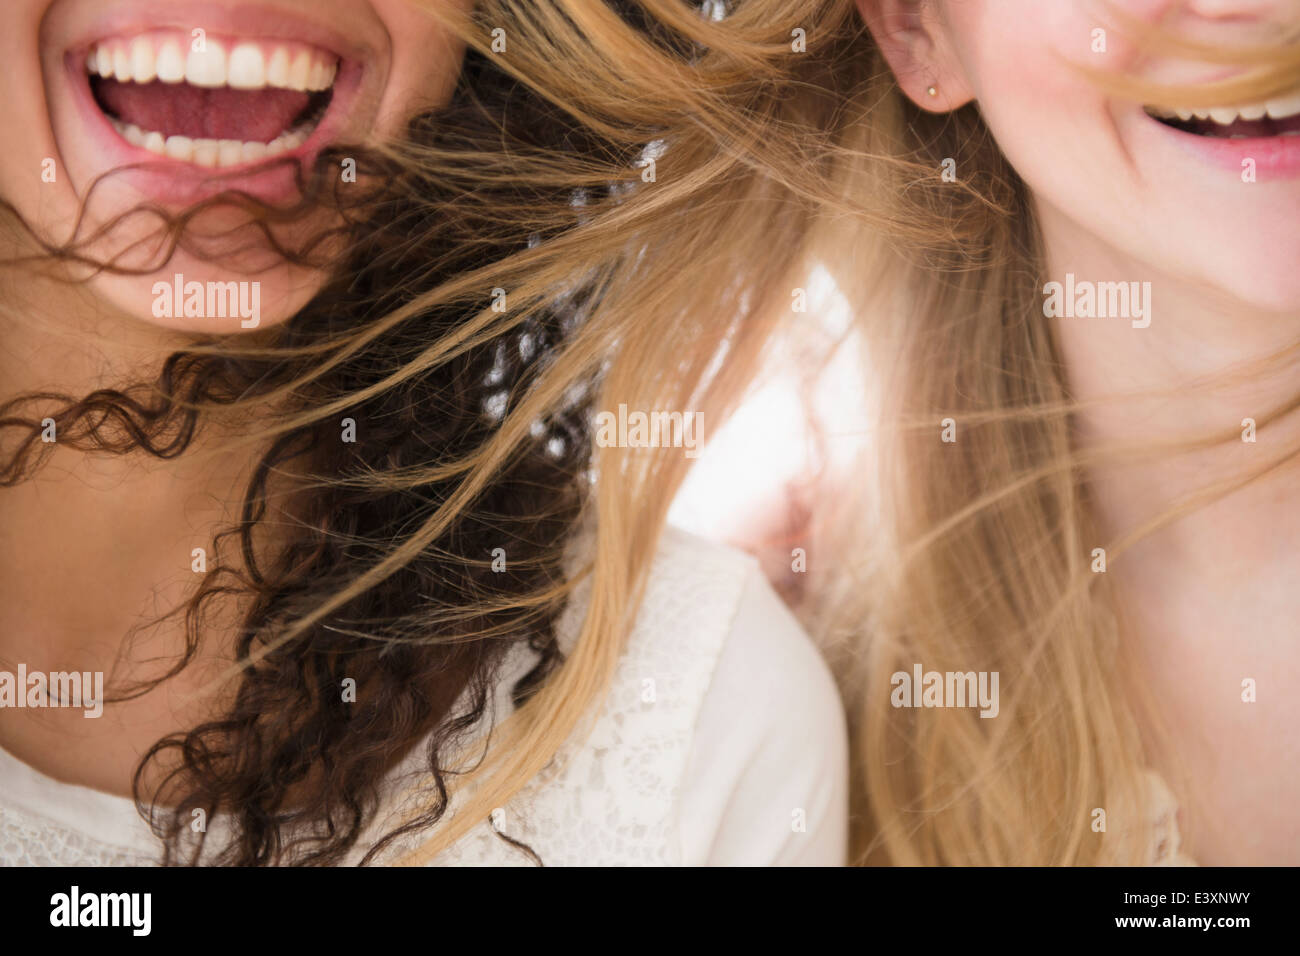 Close up of women's hair blowing in wind Banque D'Images